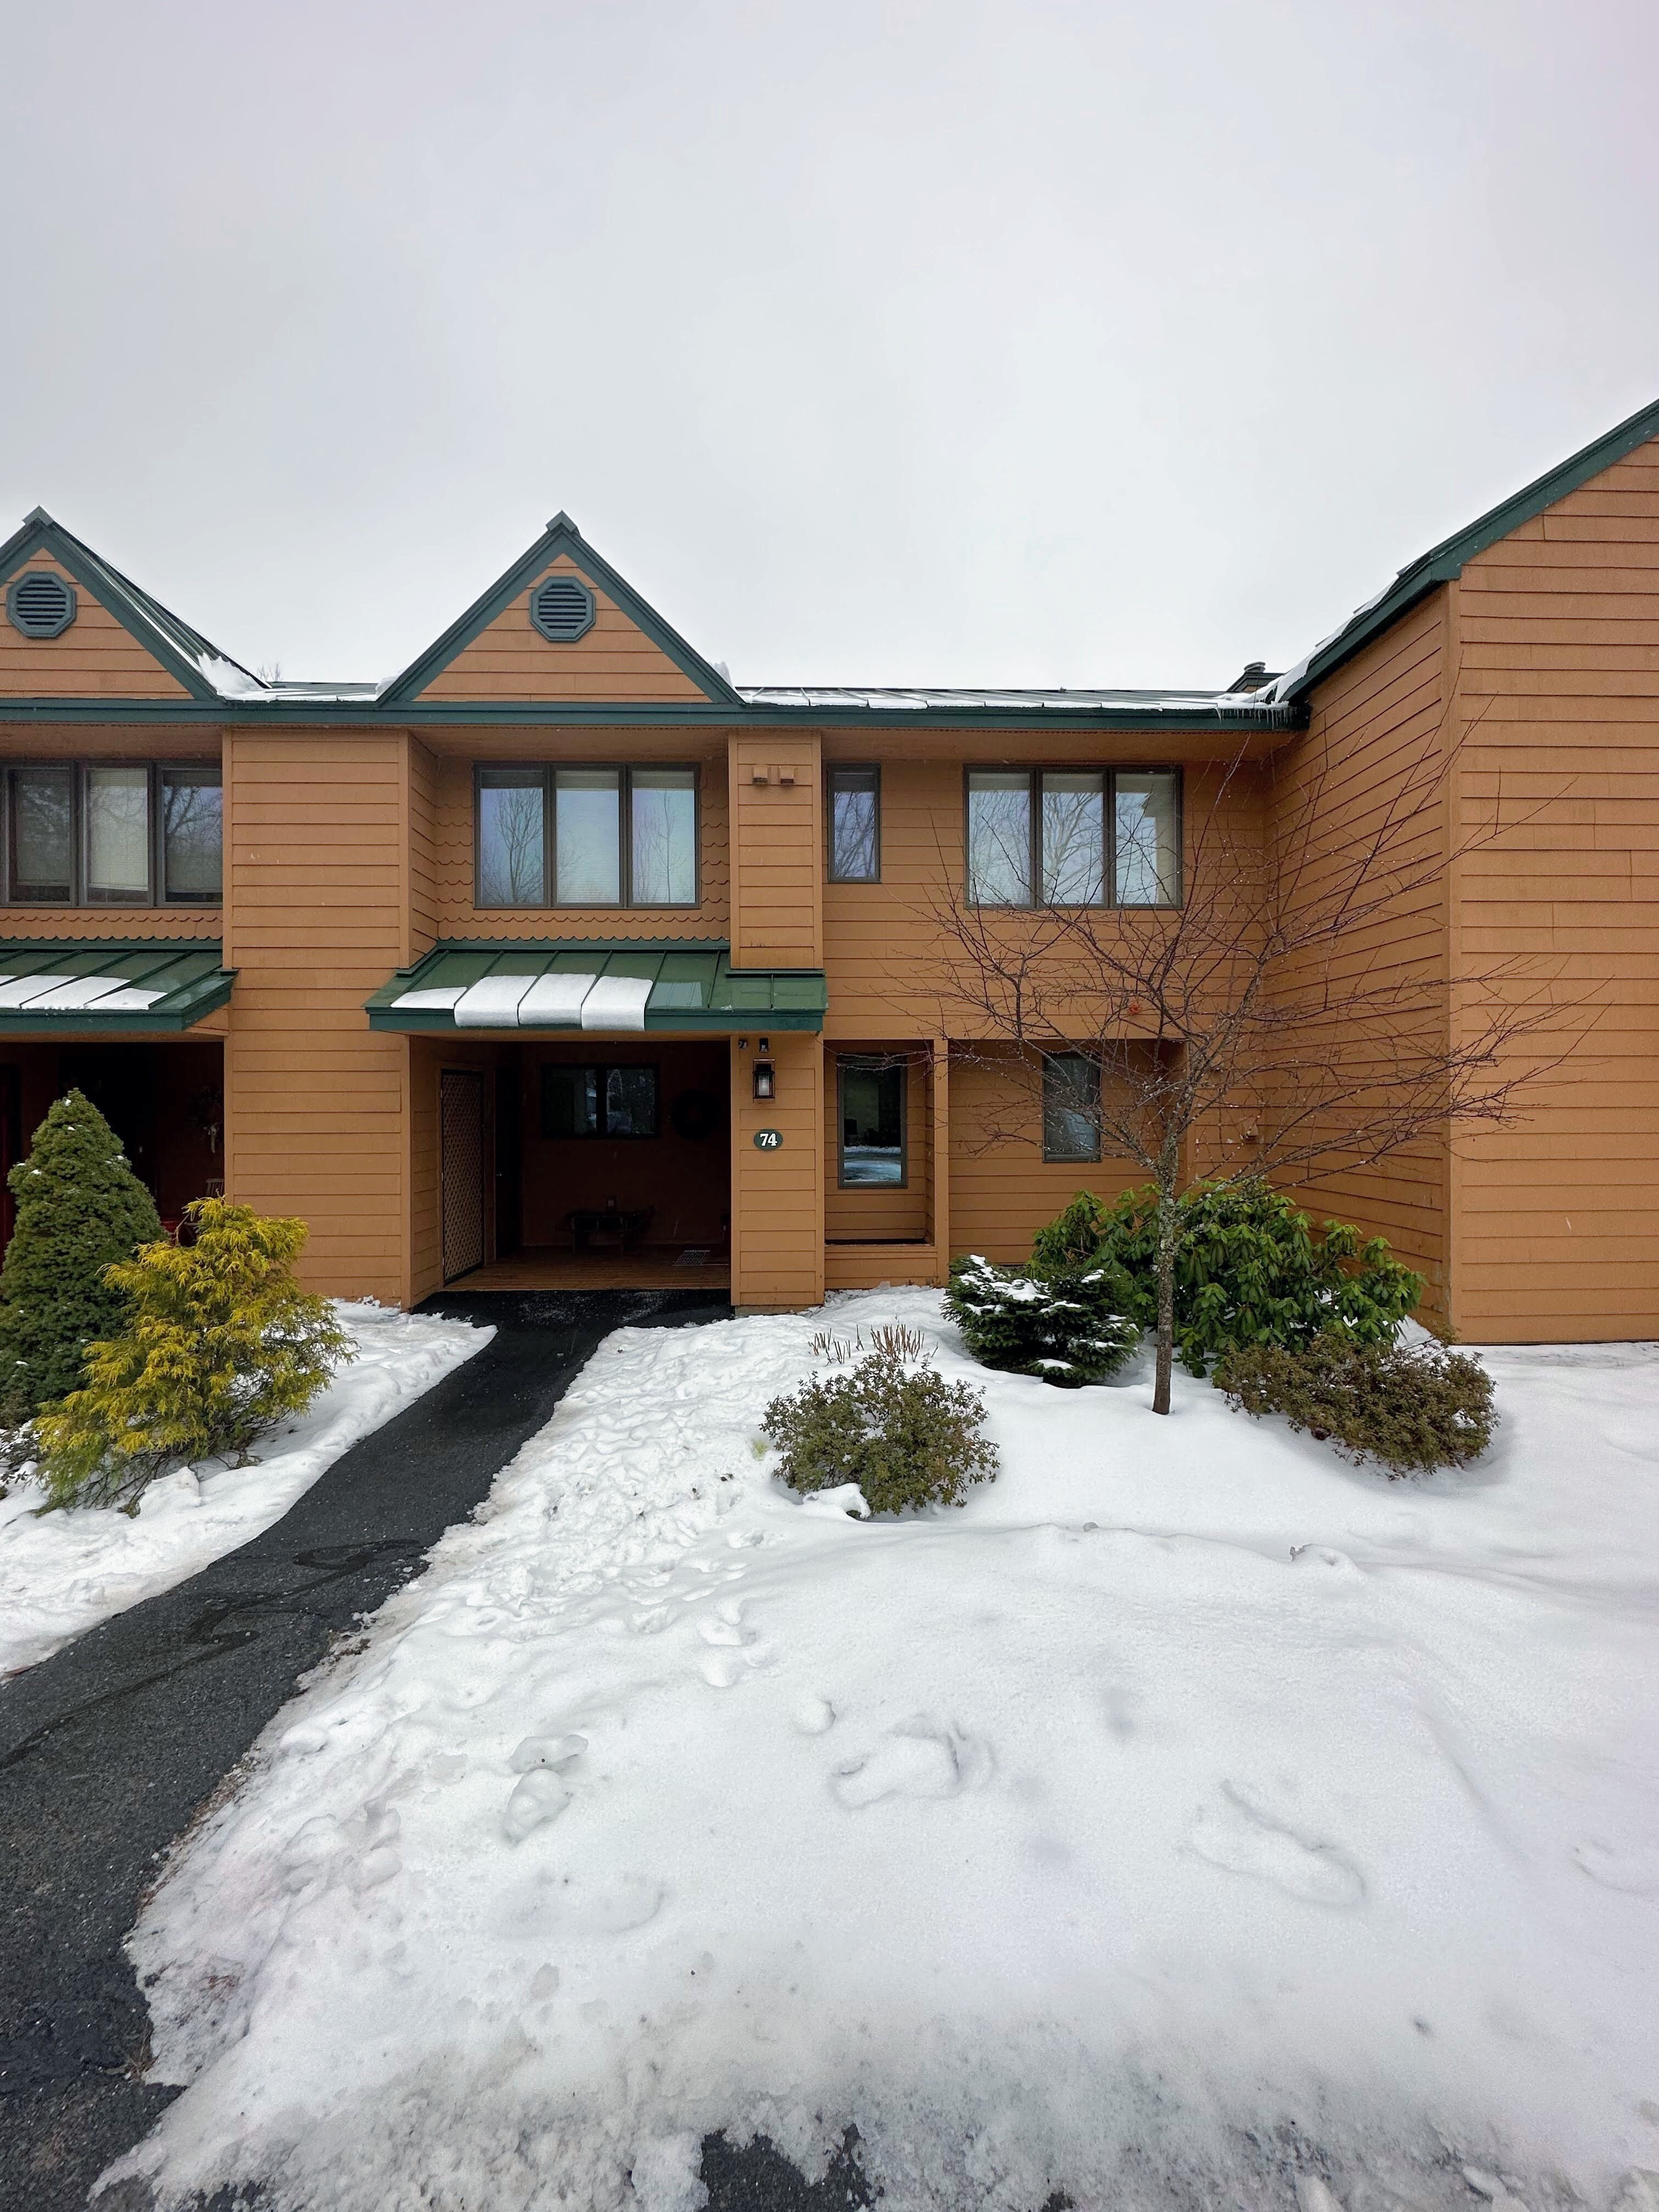 2 bedroom Mount Washington Place. A mere 15-minute walk to the historic Mount Washington Hotel and just a minute drive to the award winning Bretton Woods ski area.